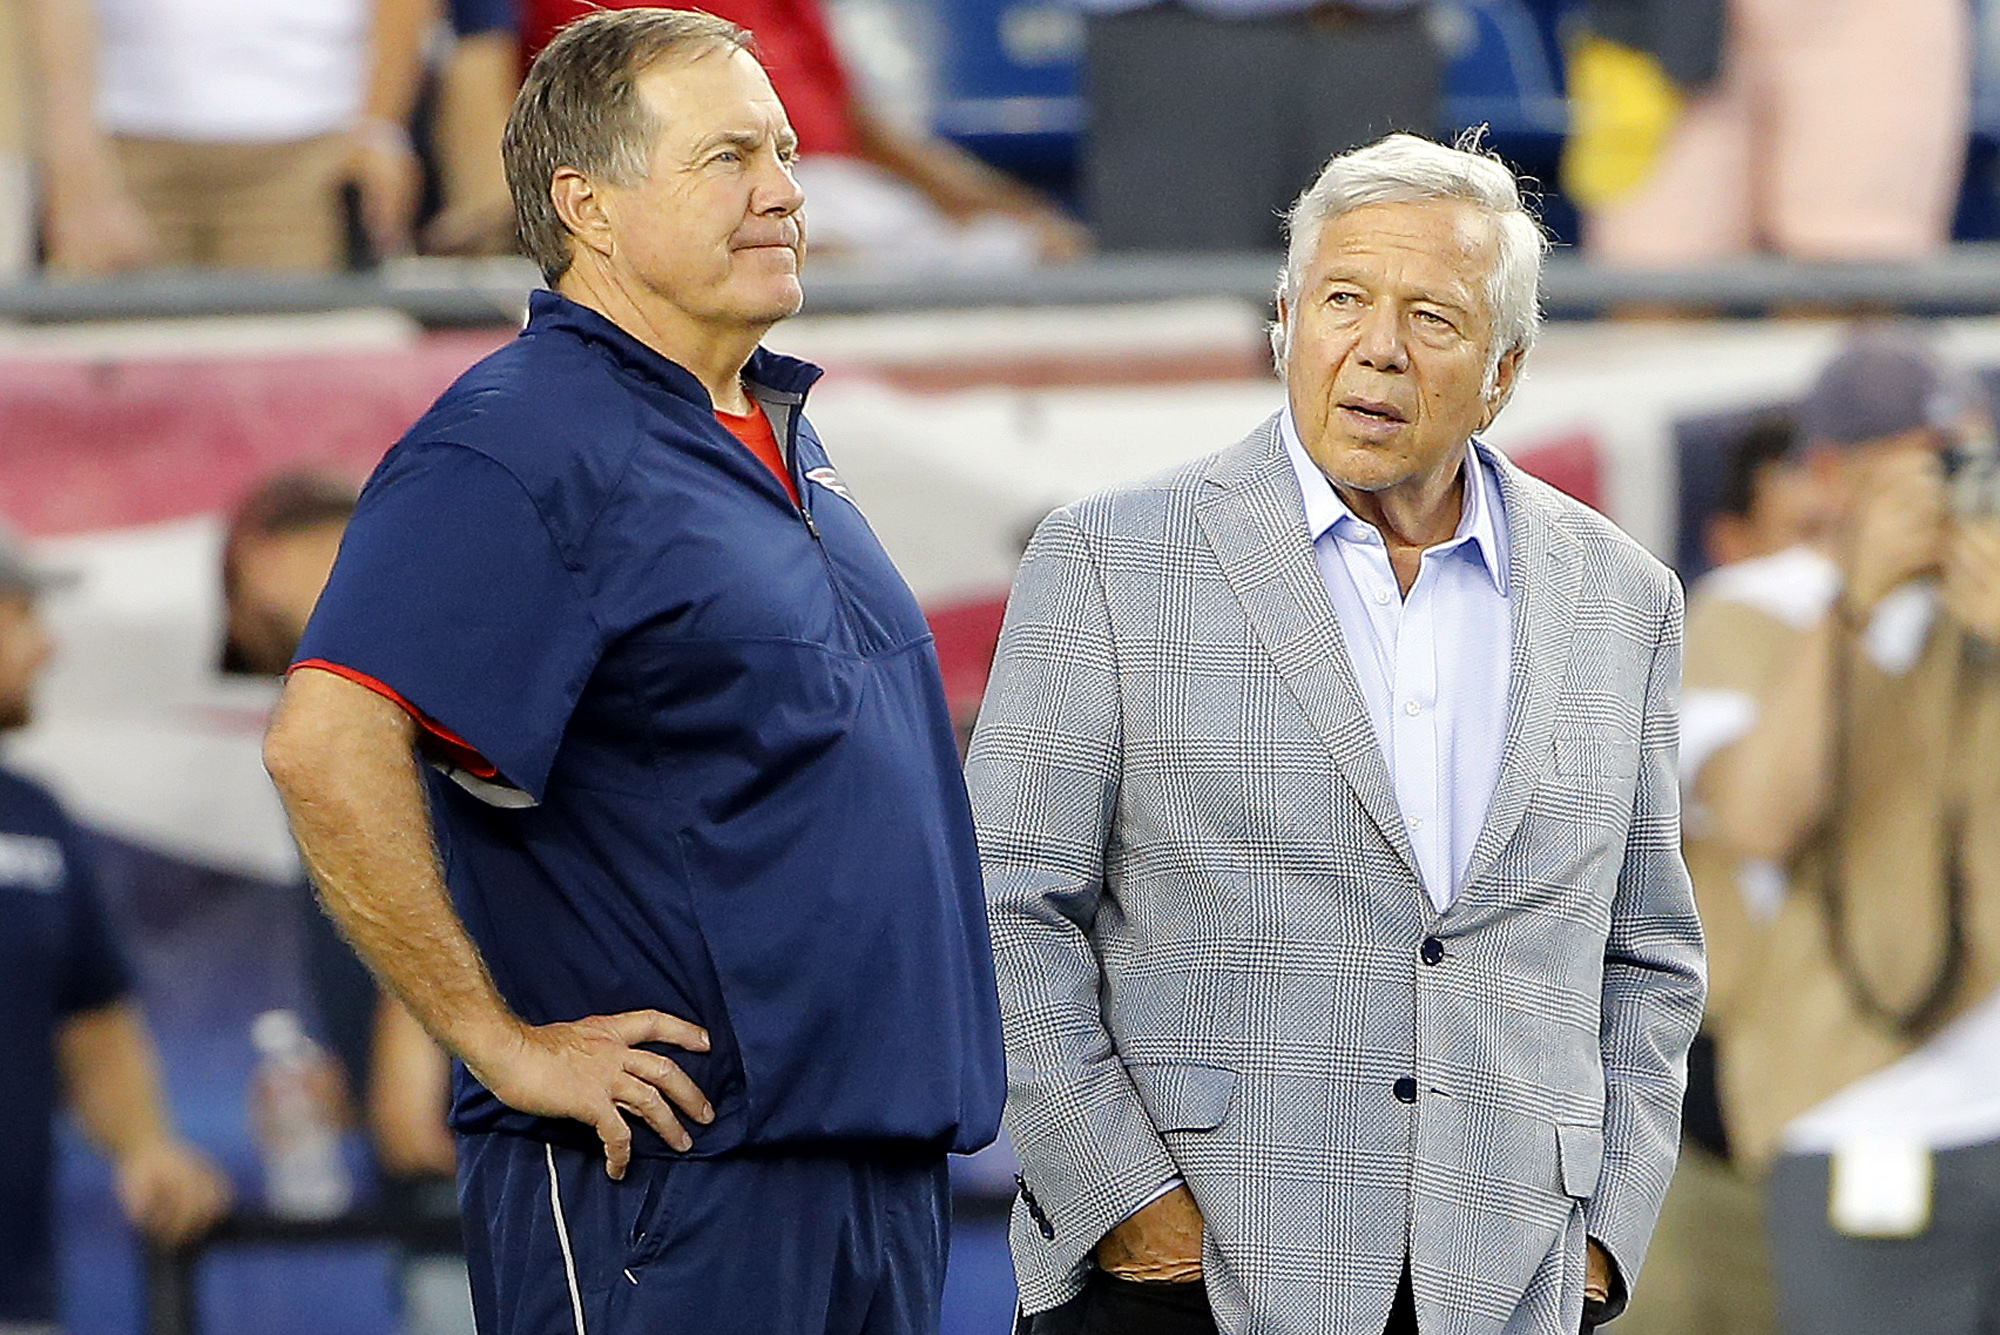  NFL Drama Unfolds: Analyst Nick Wright Condemns Patriots’ Owner Robert Kraft's Actions